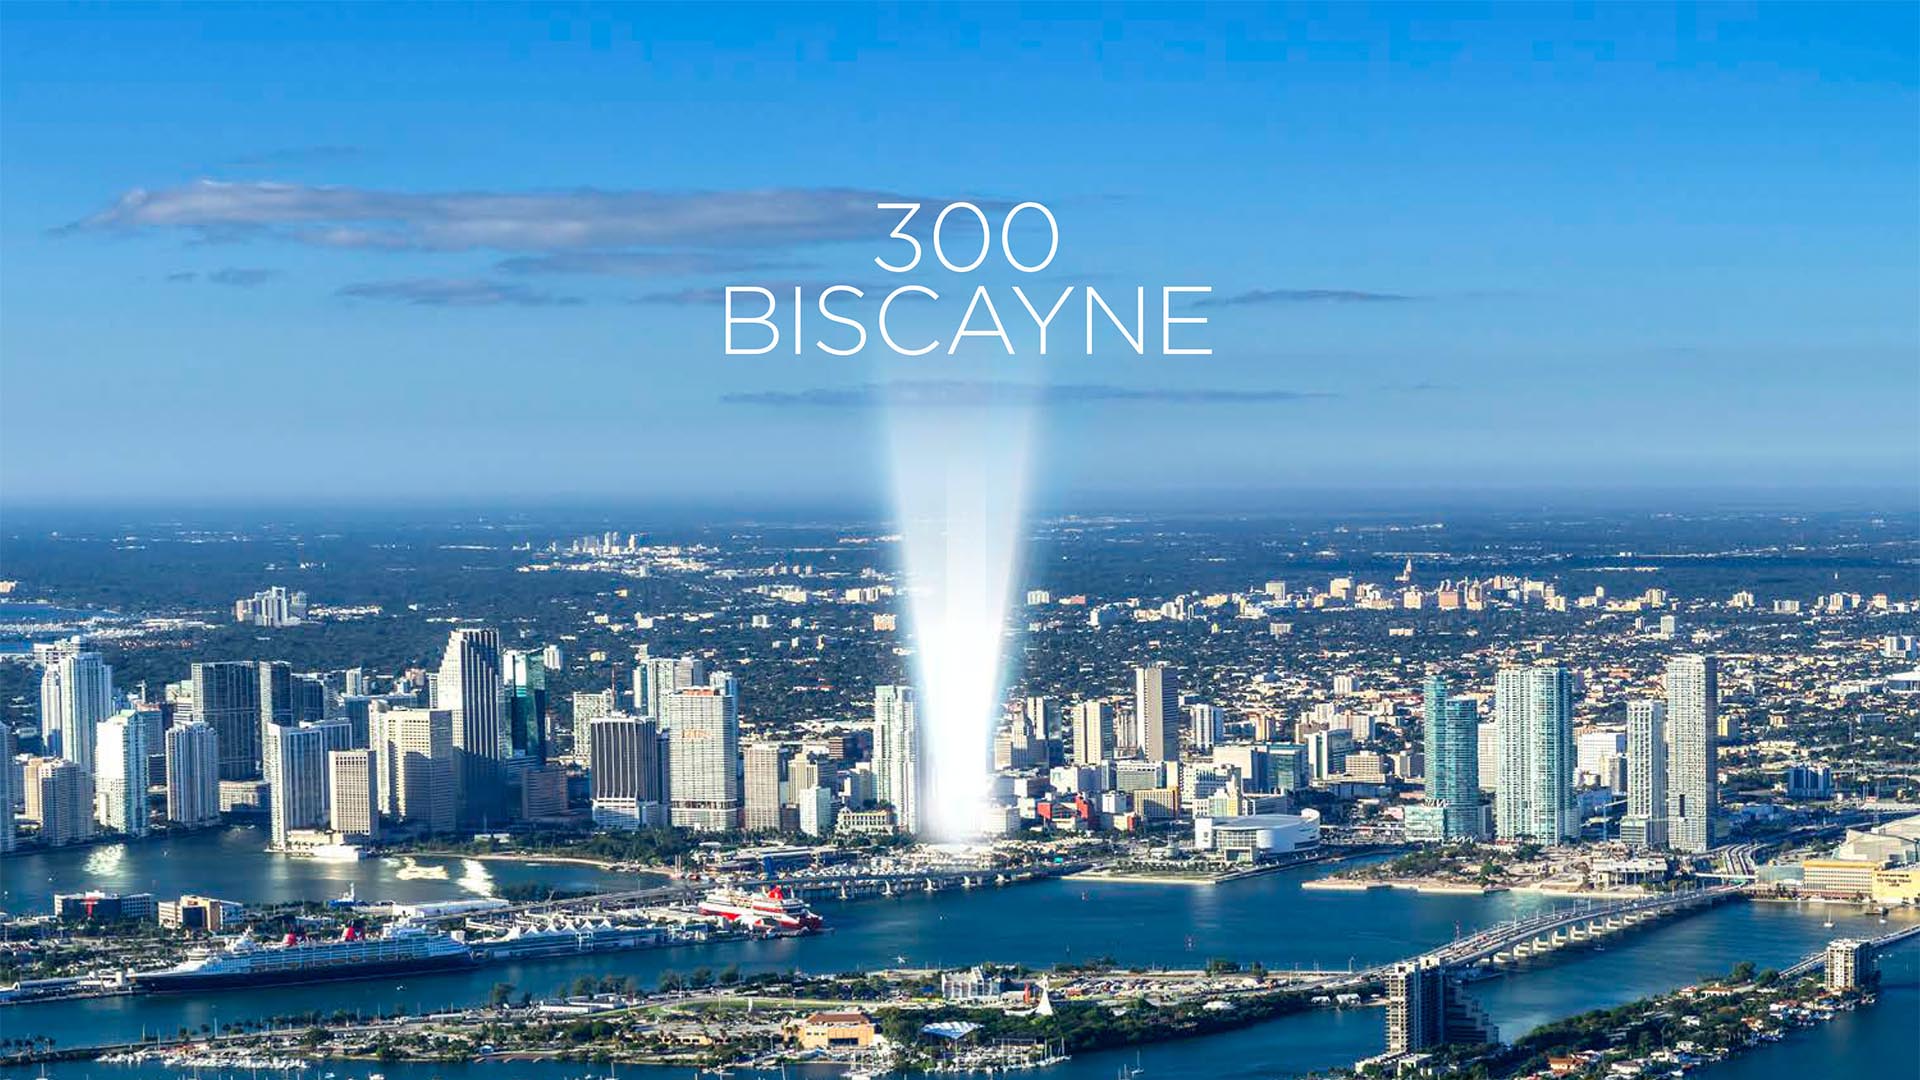 300 Biscayne to Become Miami’s Tallest Tower